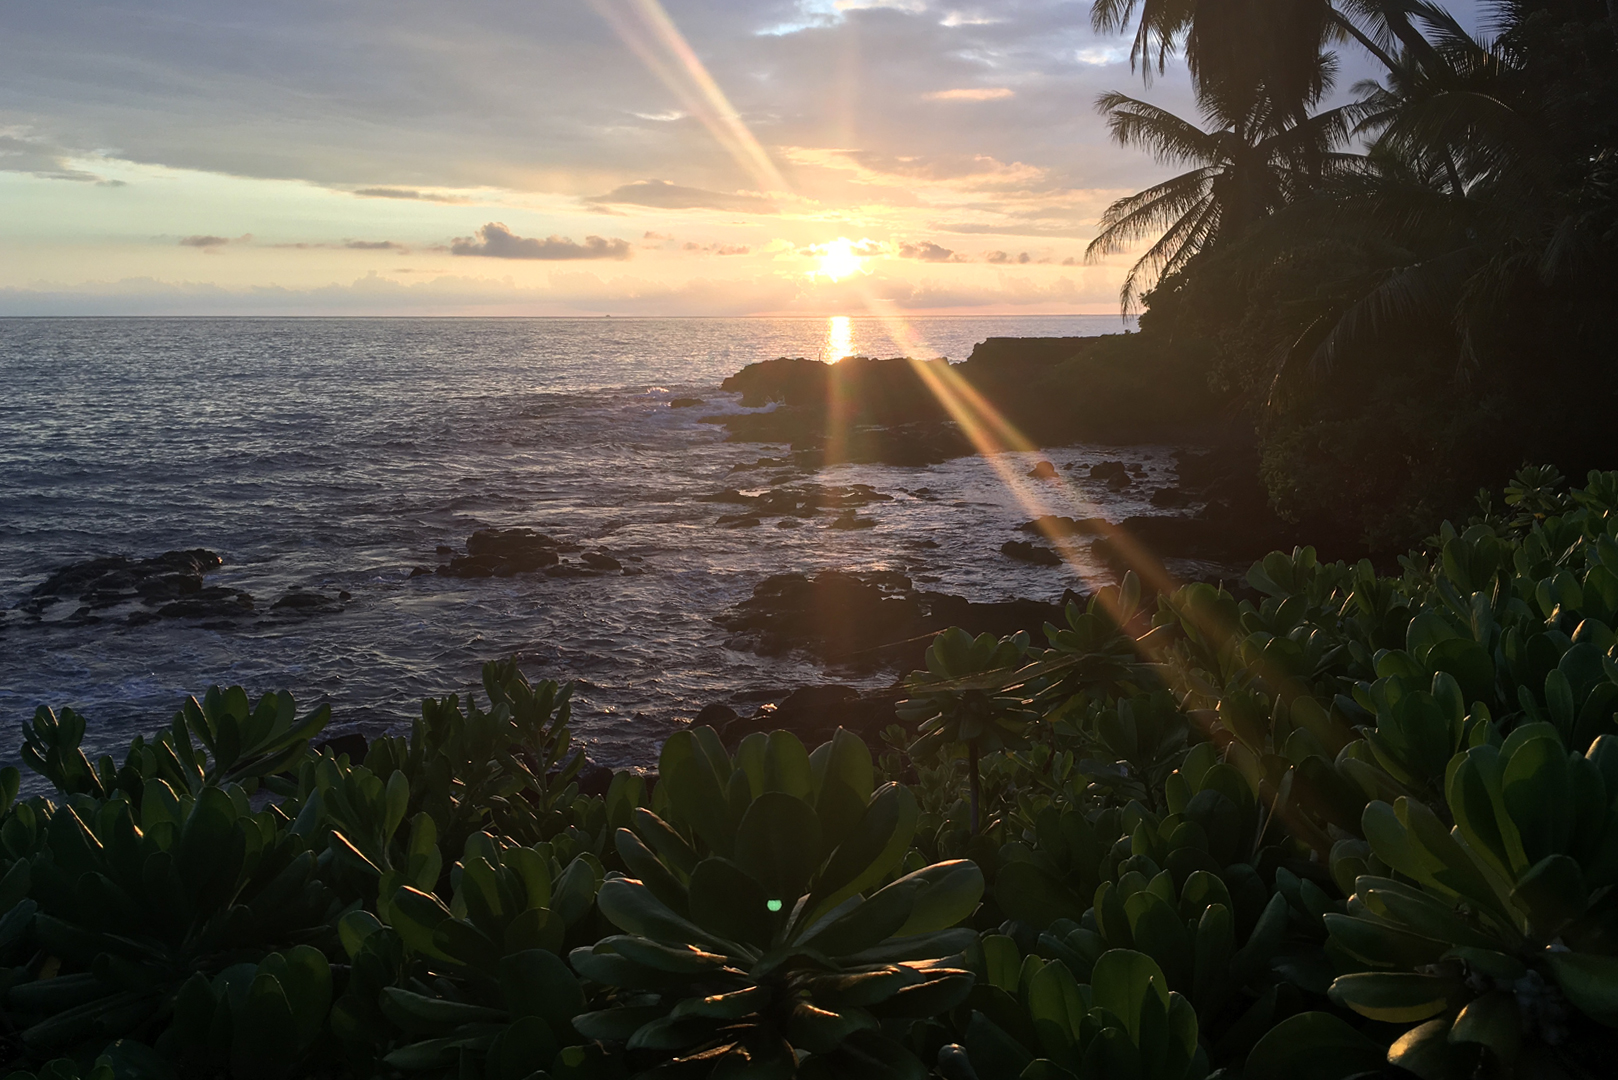 A view of a Holualoa bay sunset taken from in front of the house